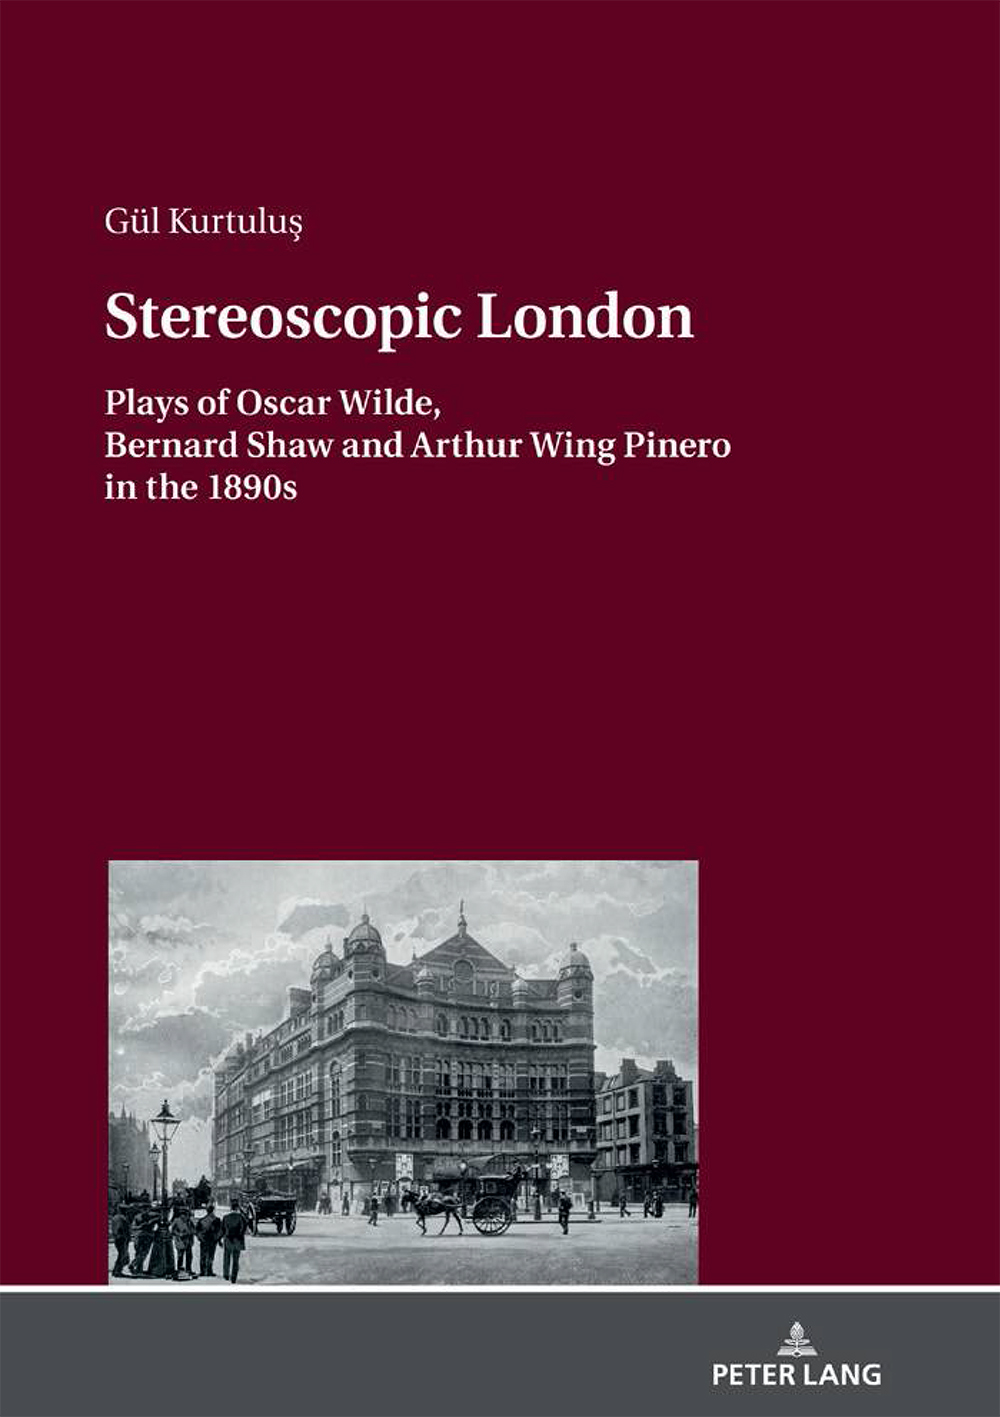 Stereoscopic London: Plays of Oscar Wilde, Bernard Shaw and Arthur Wing Pinero in the 1890s